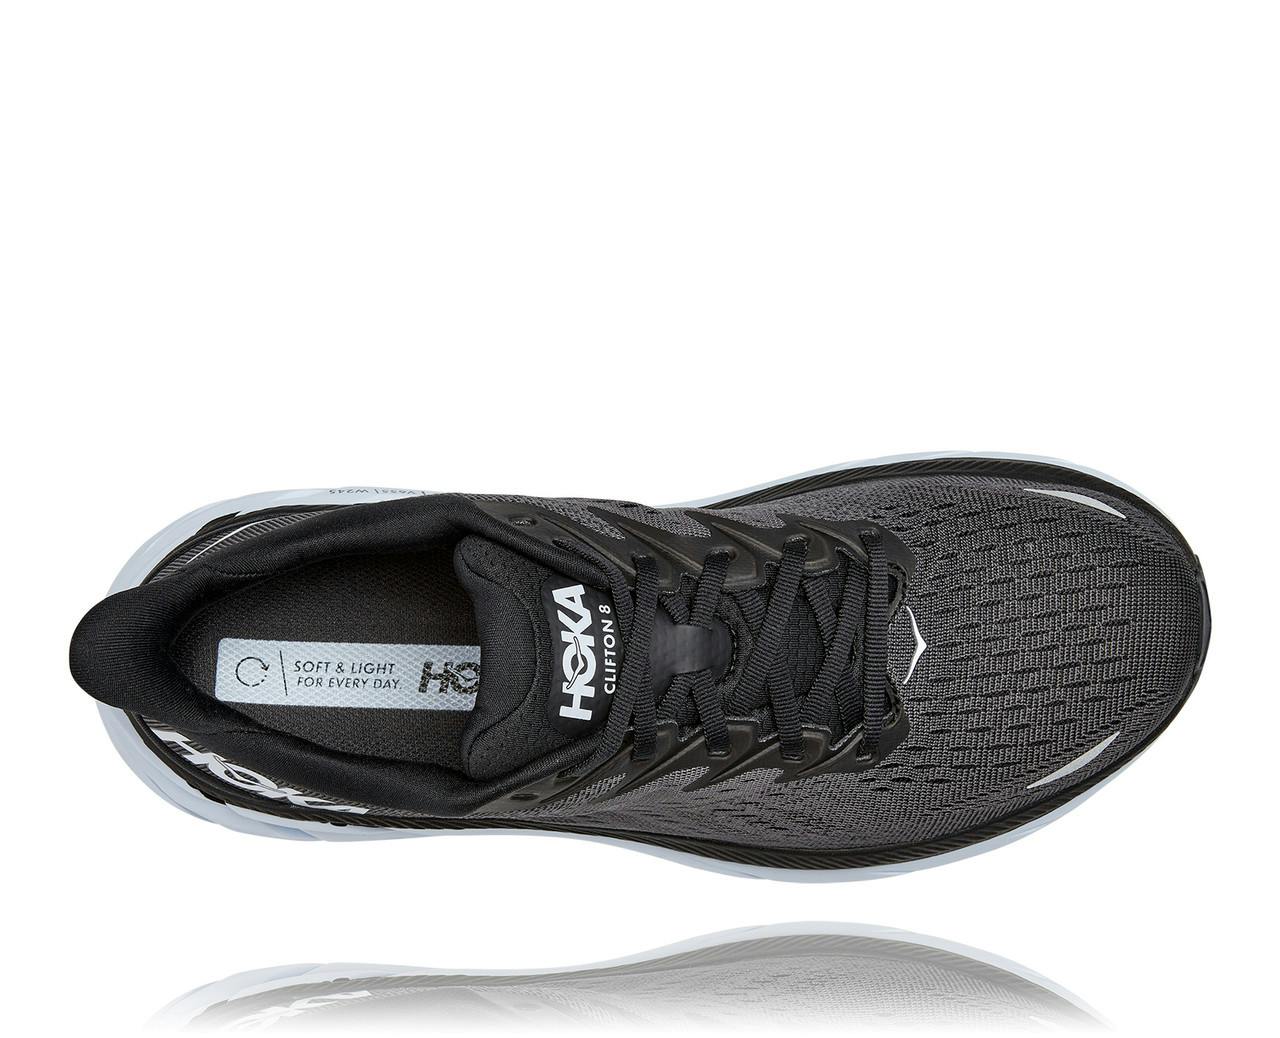 Clifton 8 Road Running Shoes Black/White